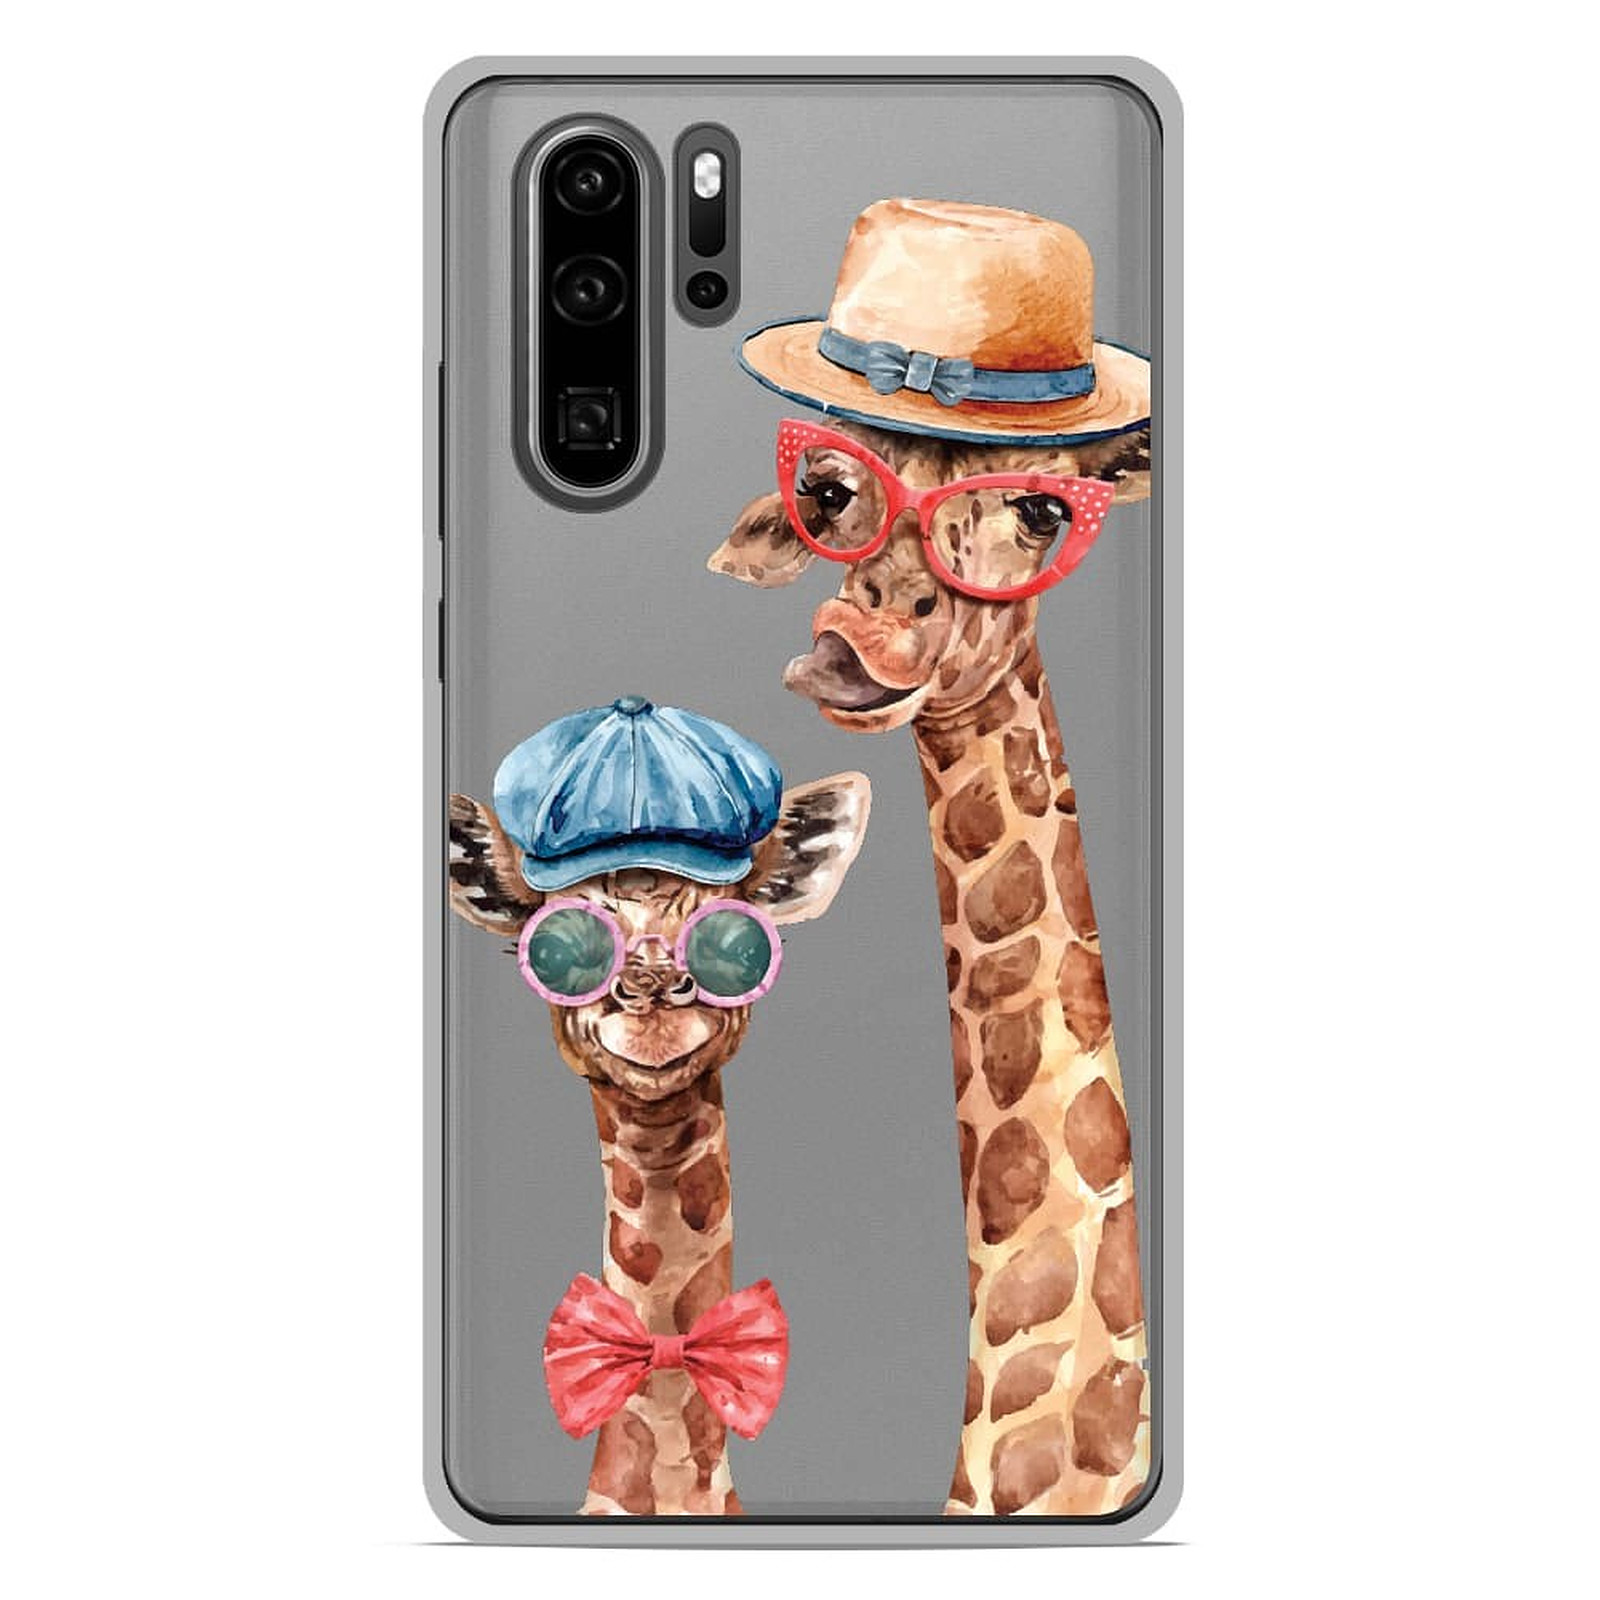 1001 Coques Coque silicone gel Huawei P30 Pro motif Funny Girafe - Coque telephone 1001Coques